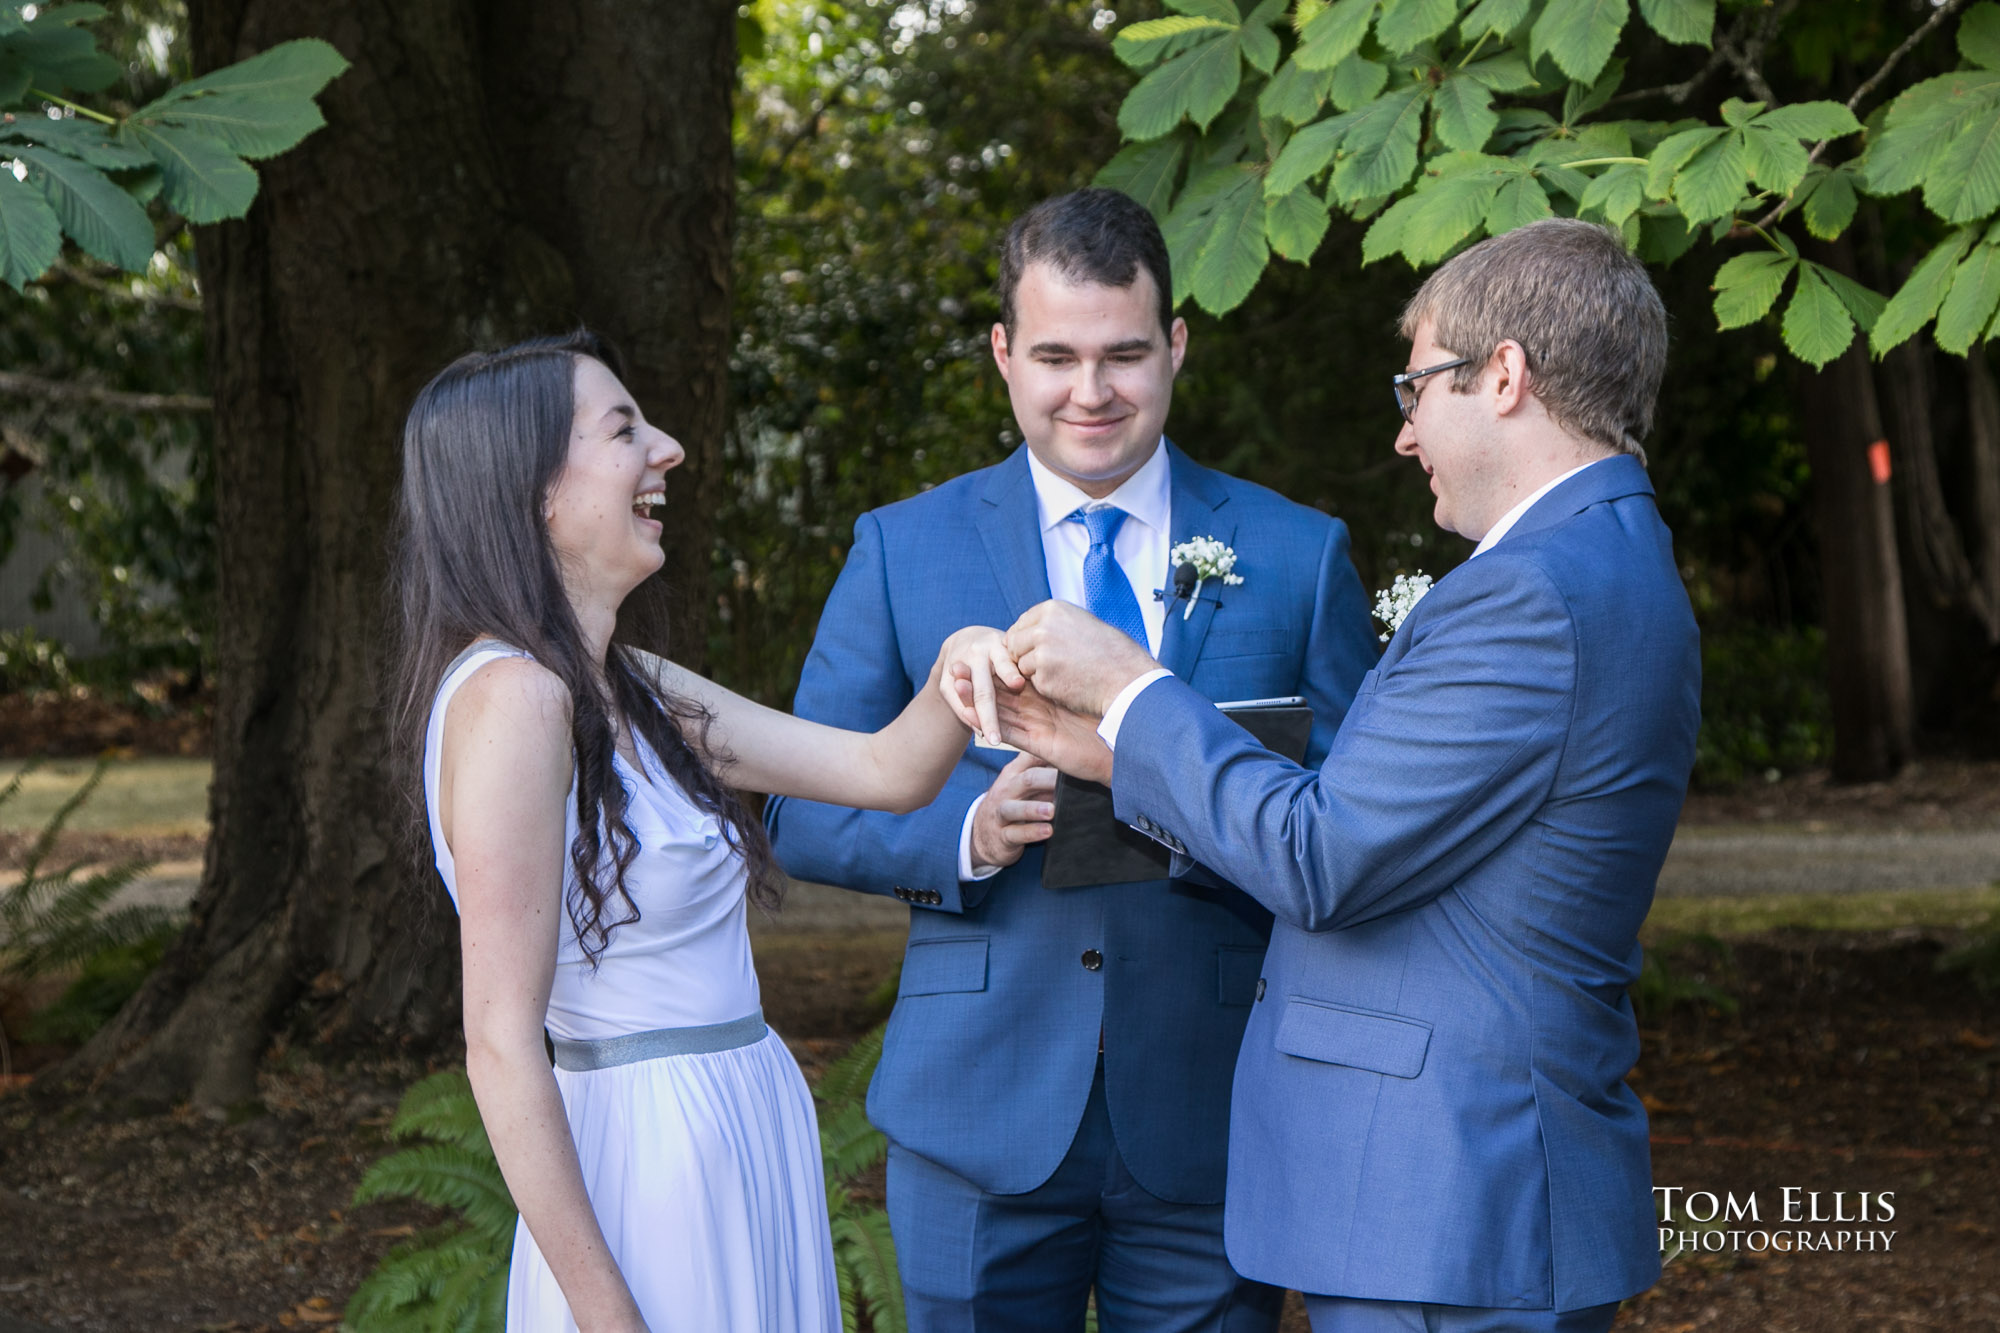 Bride breaks into laughter as the groom attempts to get the ring onto her uncooperative finger during their Seattle area wedding ceremony